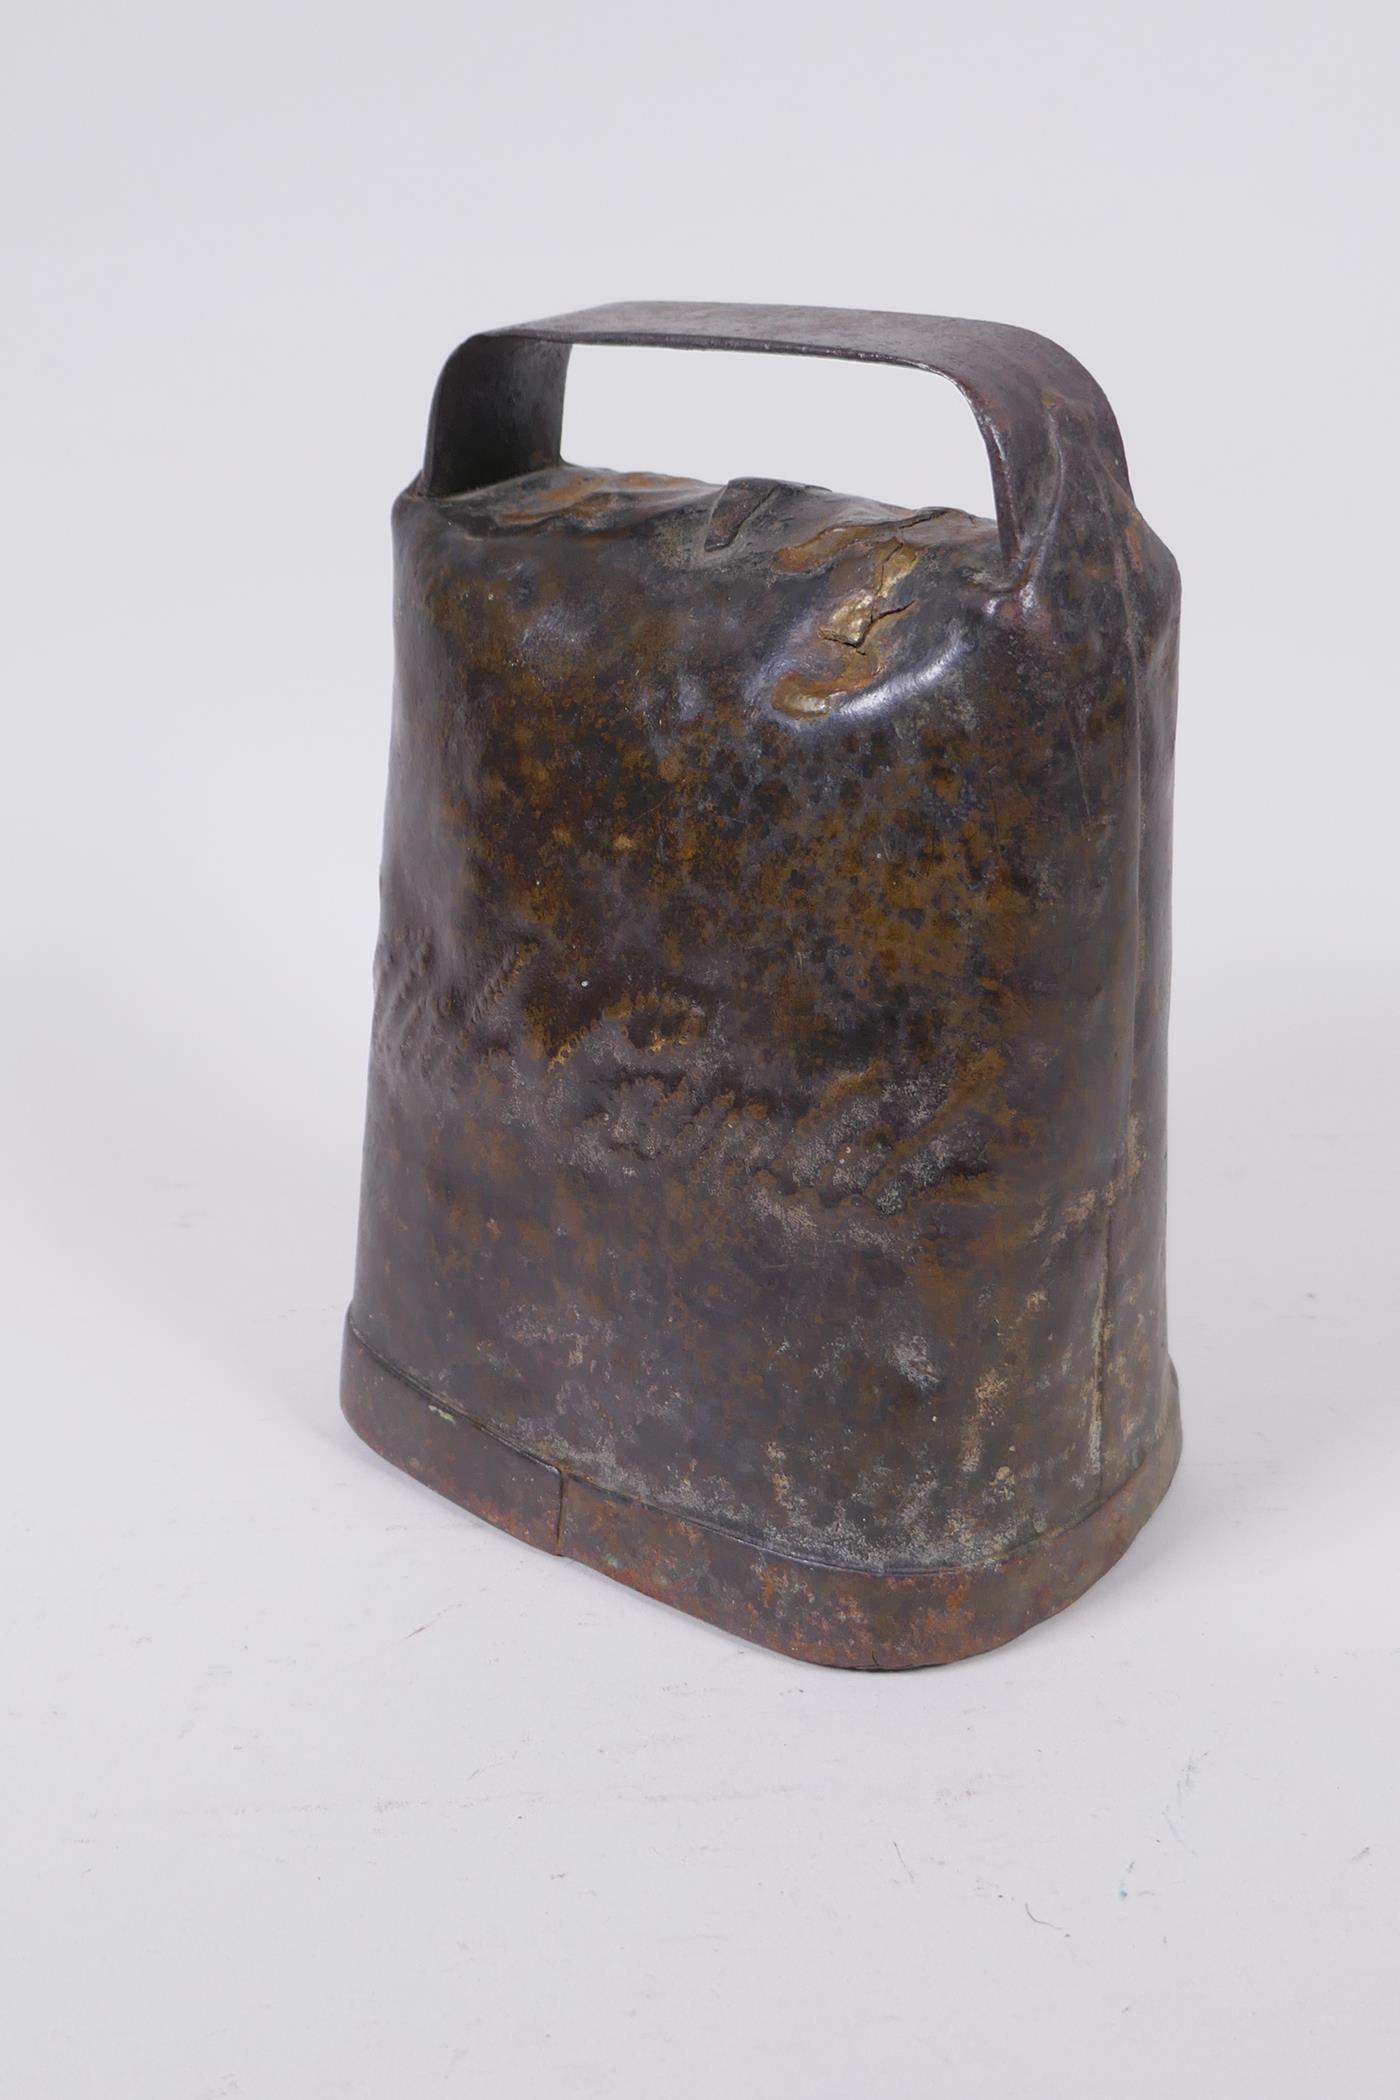 An antique continental cow bell, 14 x 19cm - Image 2 of 6